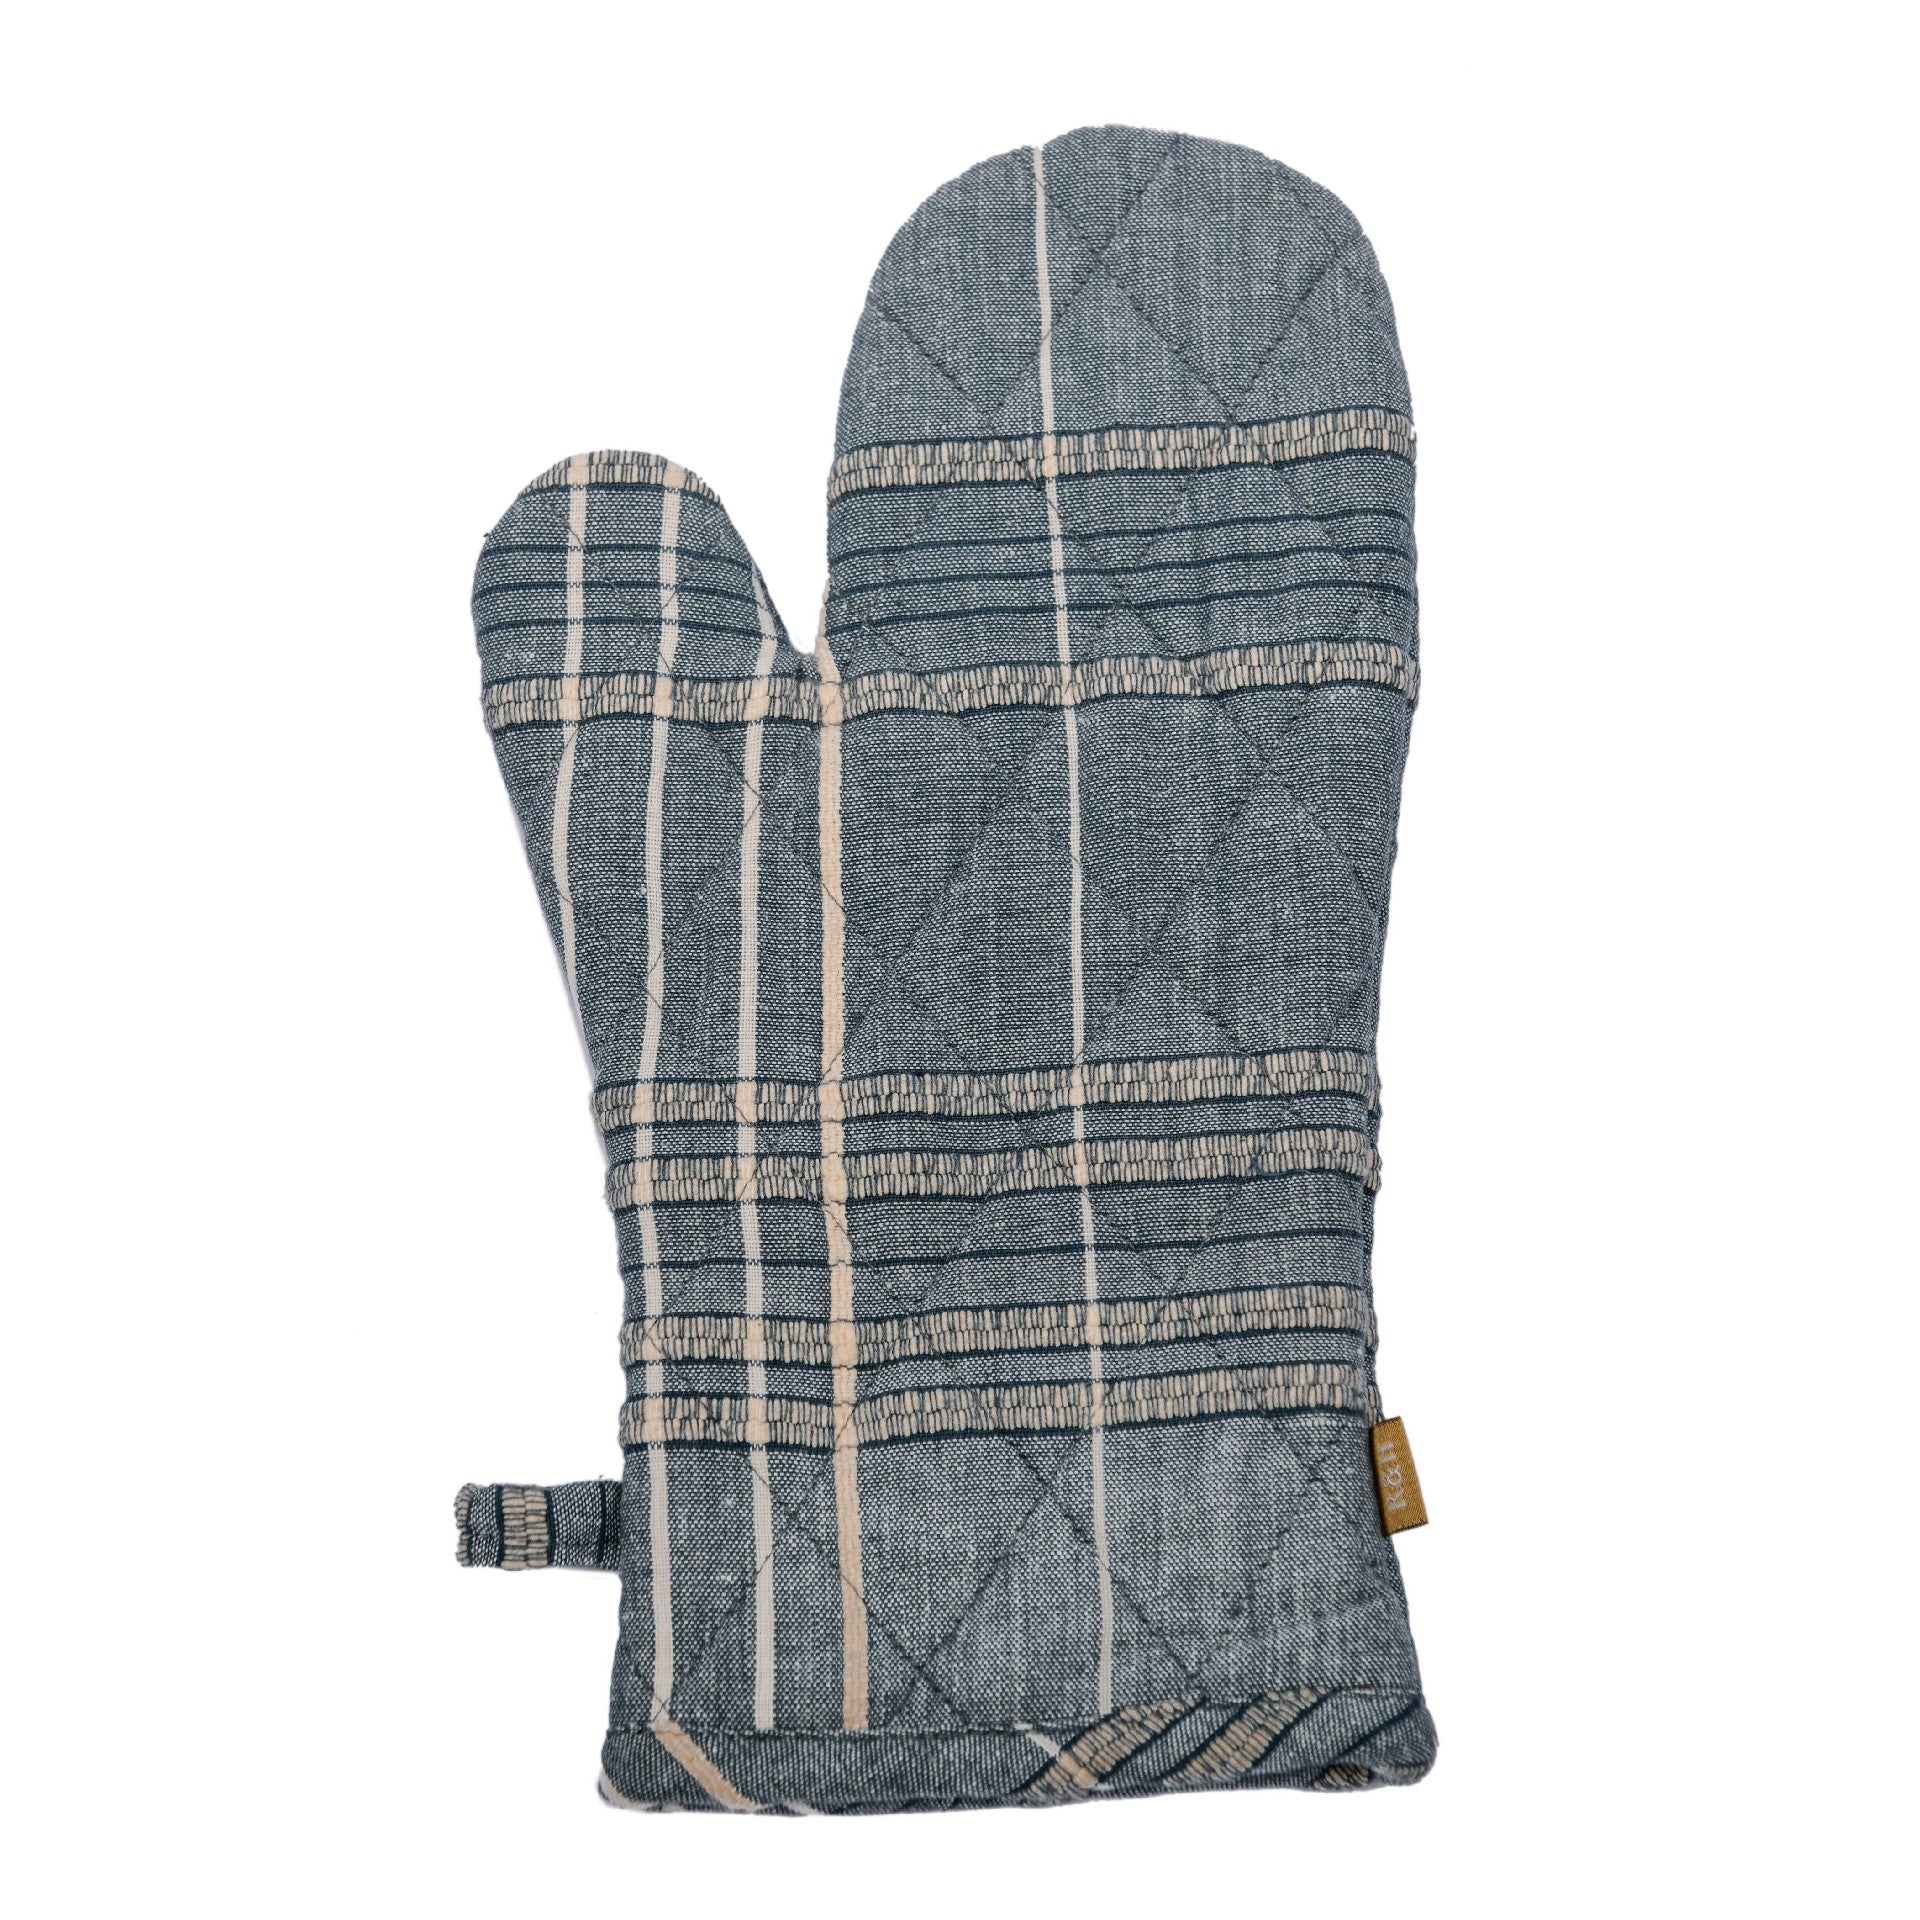 Oven Glove: Textured Check Blueberry